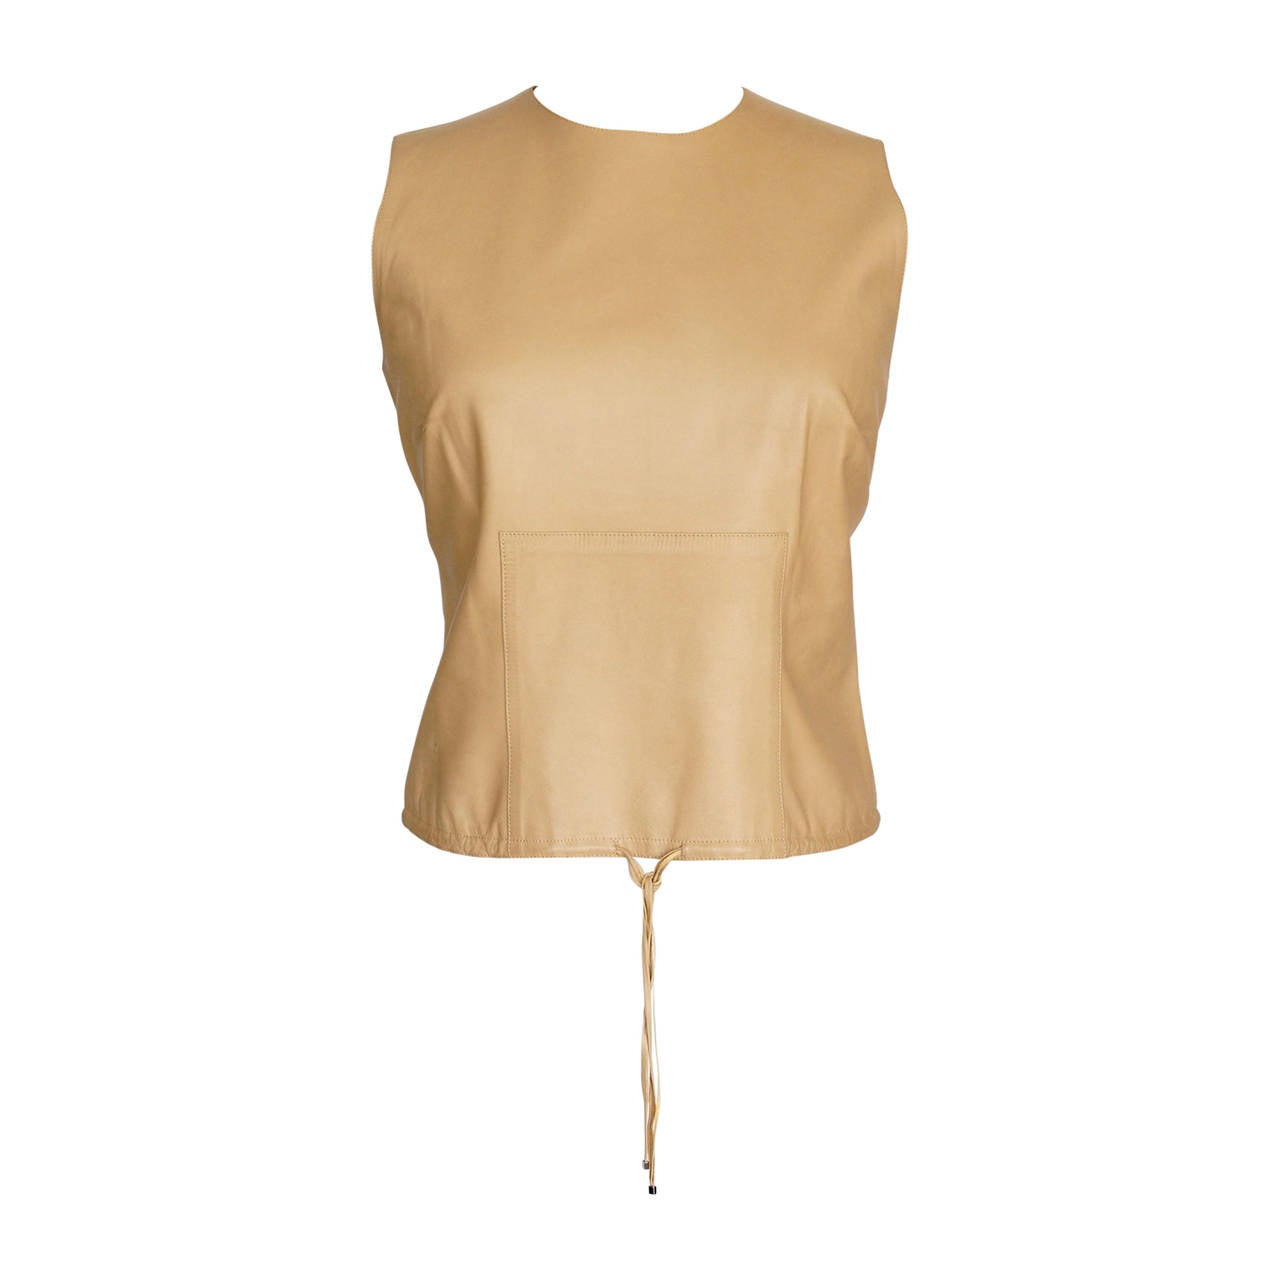 Gucci Leather Top Warm Nude Camel Sleek Classic Tom Ford 40 / 6